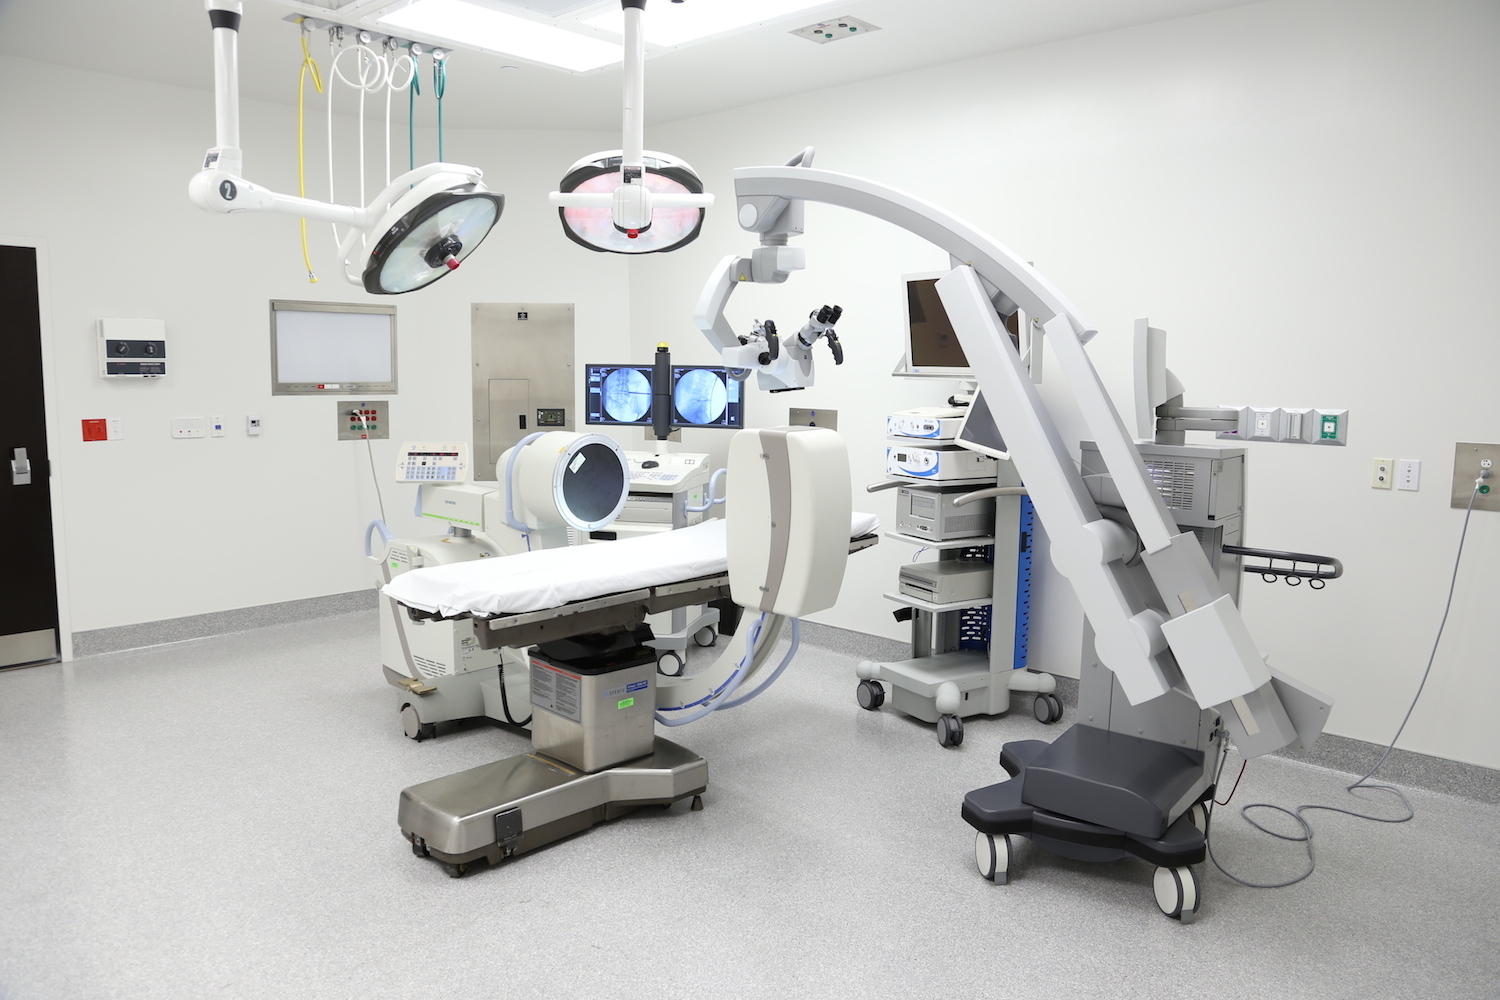 Surgery Center of Viera, Melbourne FL - Operating Room, One of 3 OR Suites